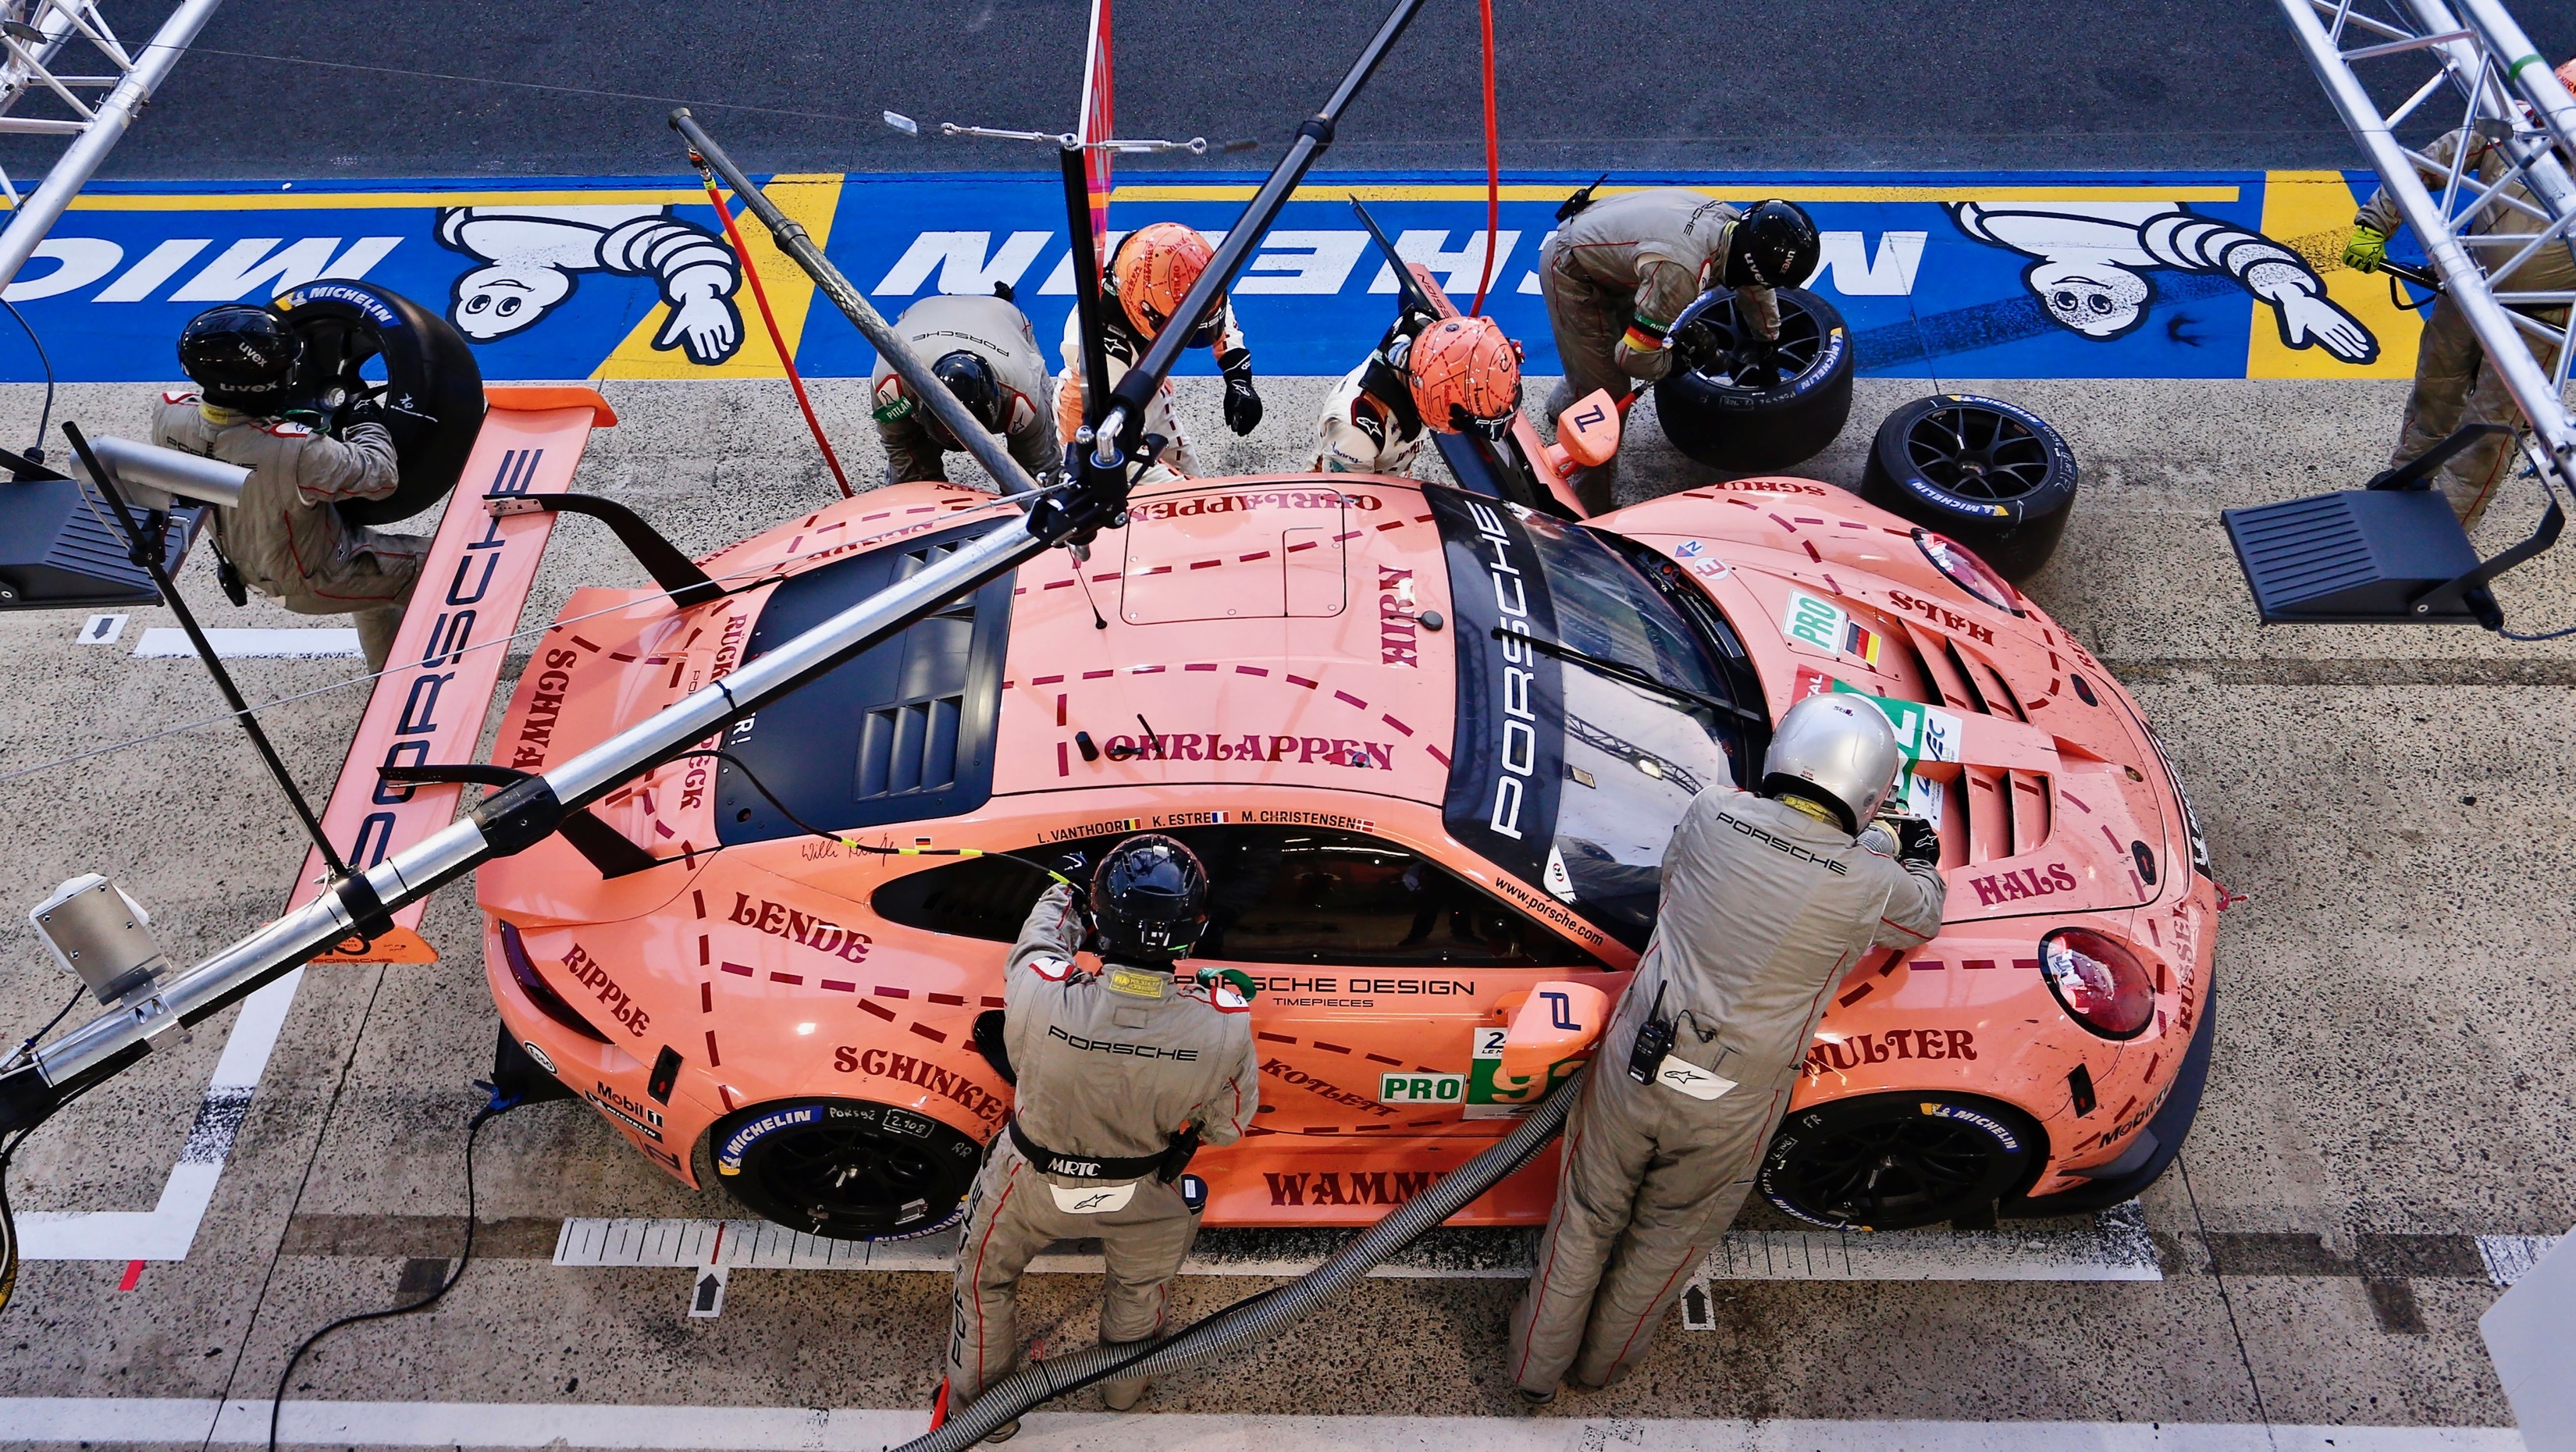 Porsche 911 RSR in Pink Pig livery at pit stop